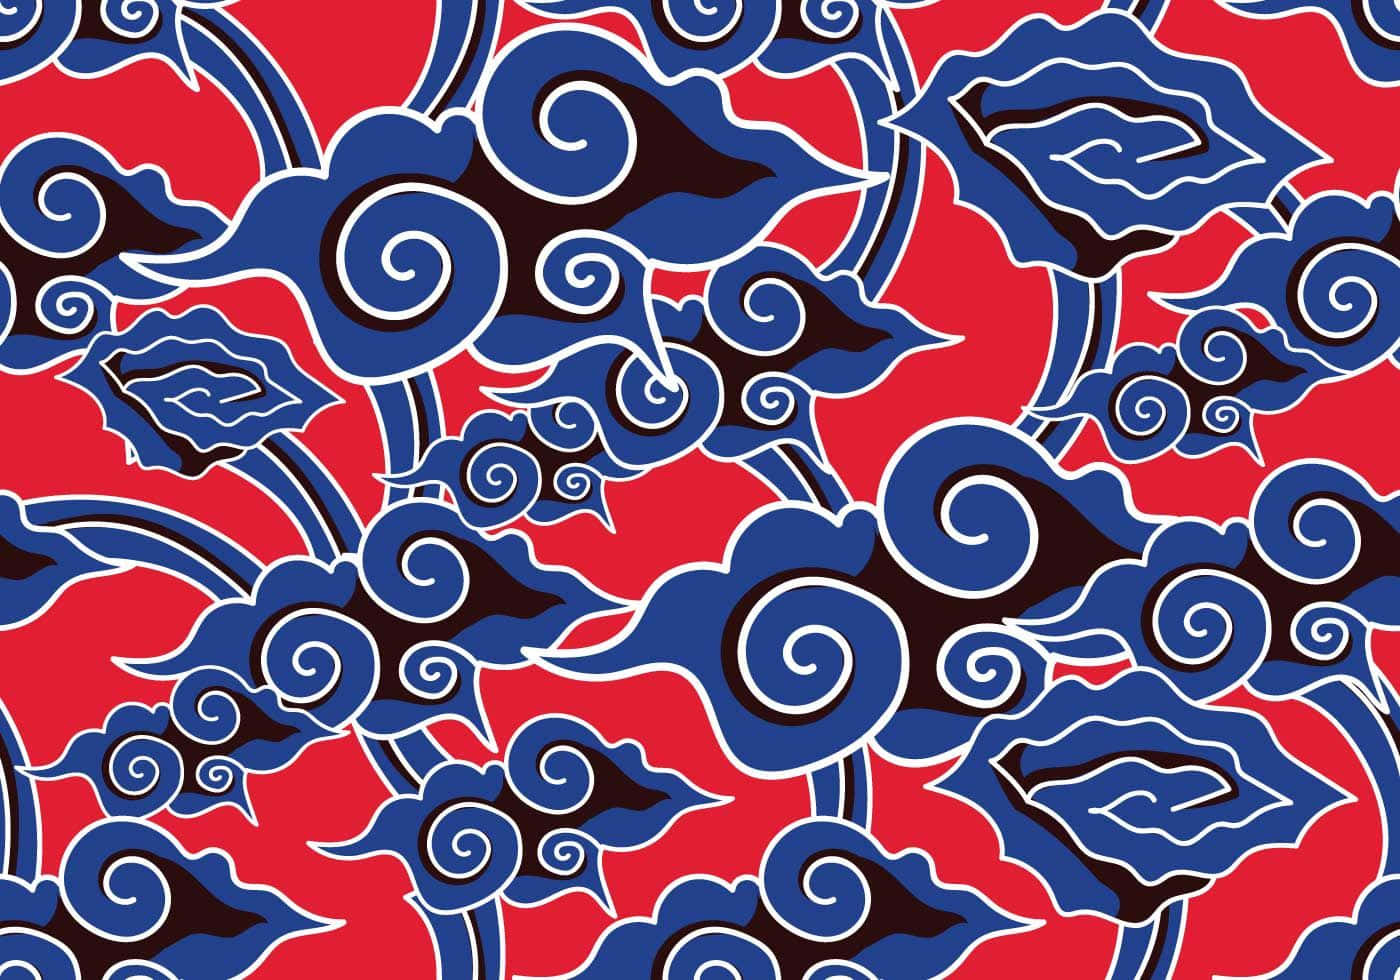 Chinese Floral Pattern On Red And Blue Background